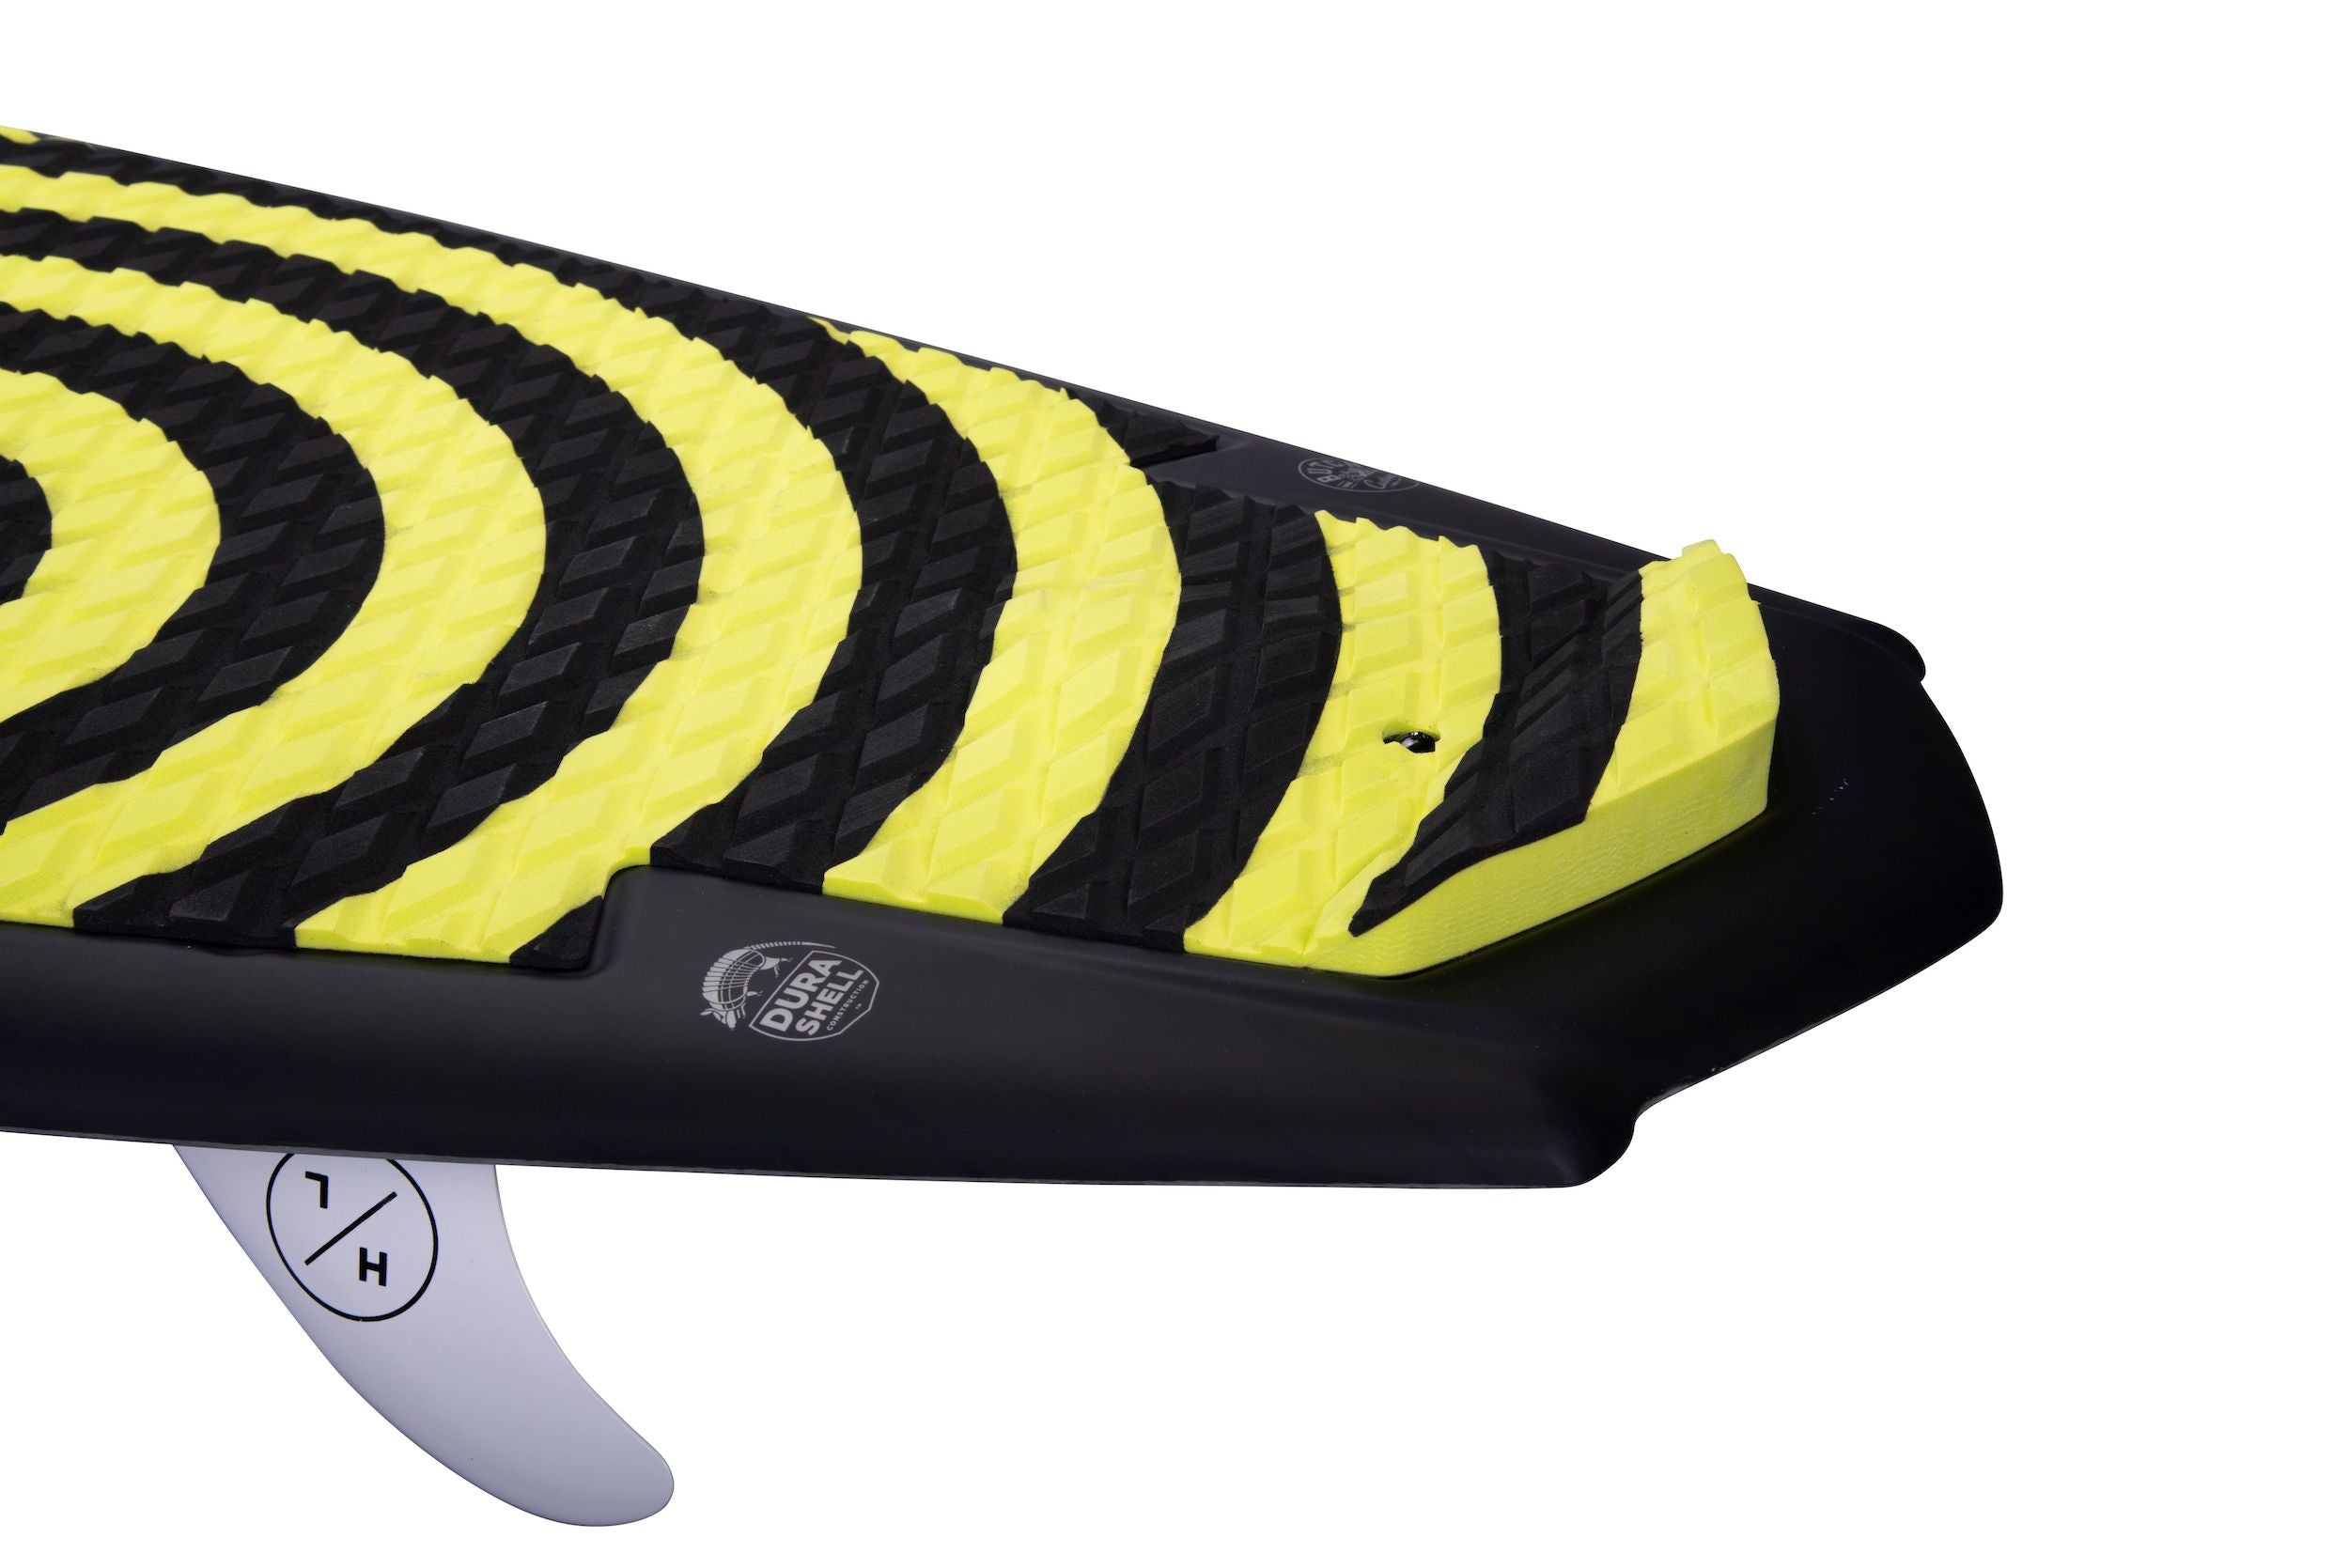 A Hyperlite 2024 Shim wakesurf board with a yellow and black design, perfect for the DuraShell Construction enthusiast.